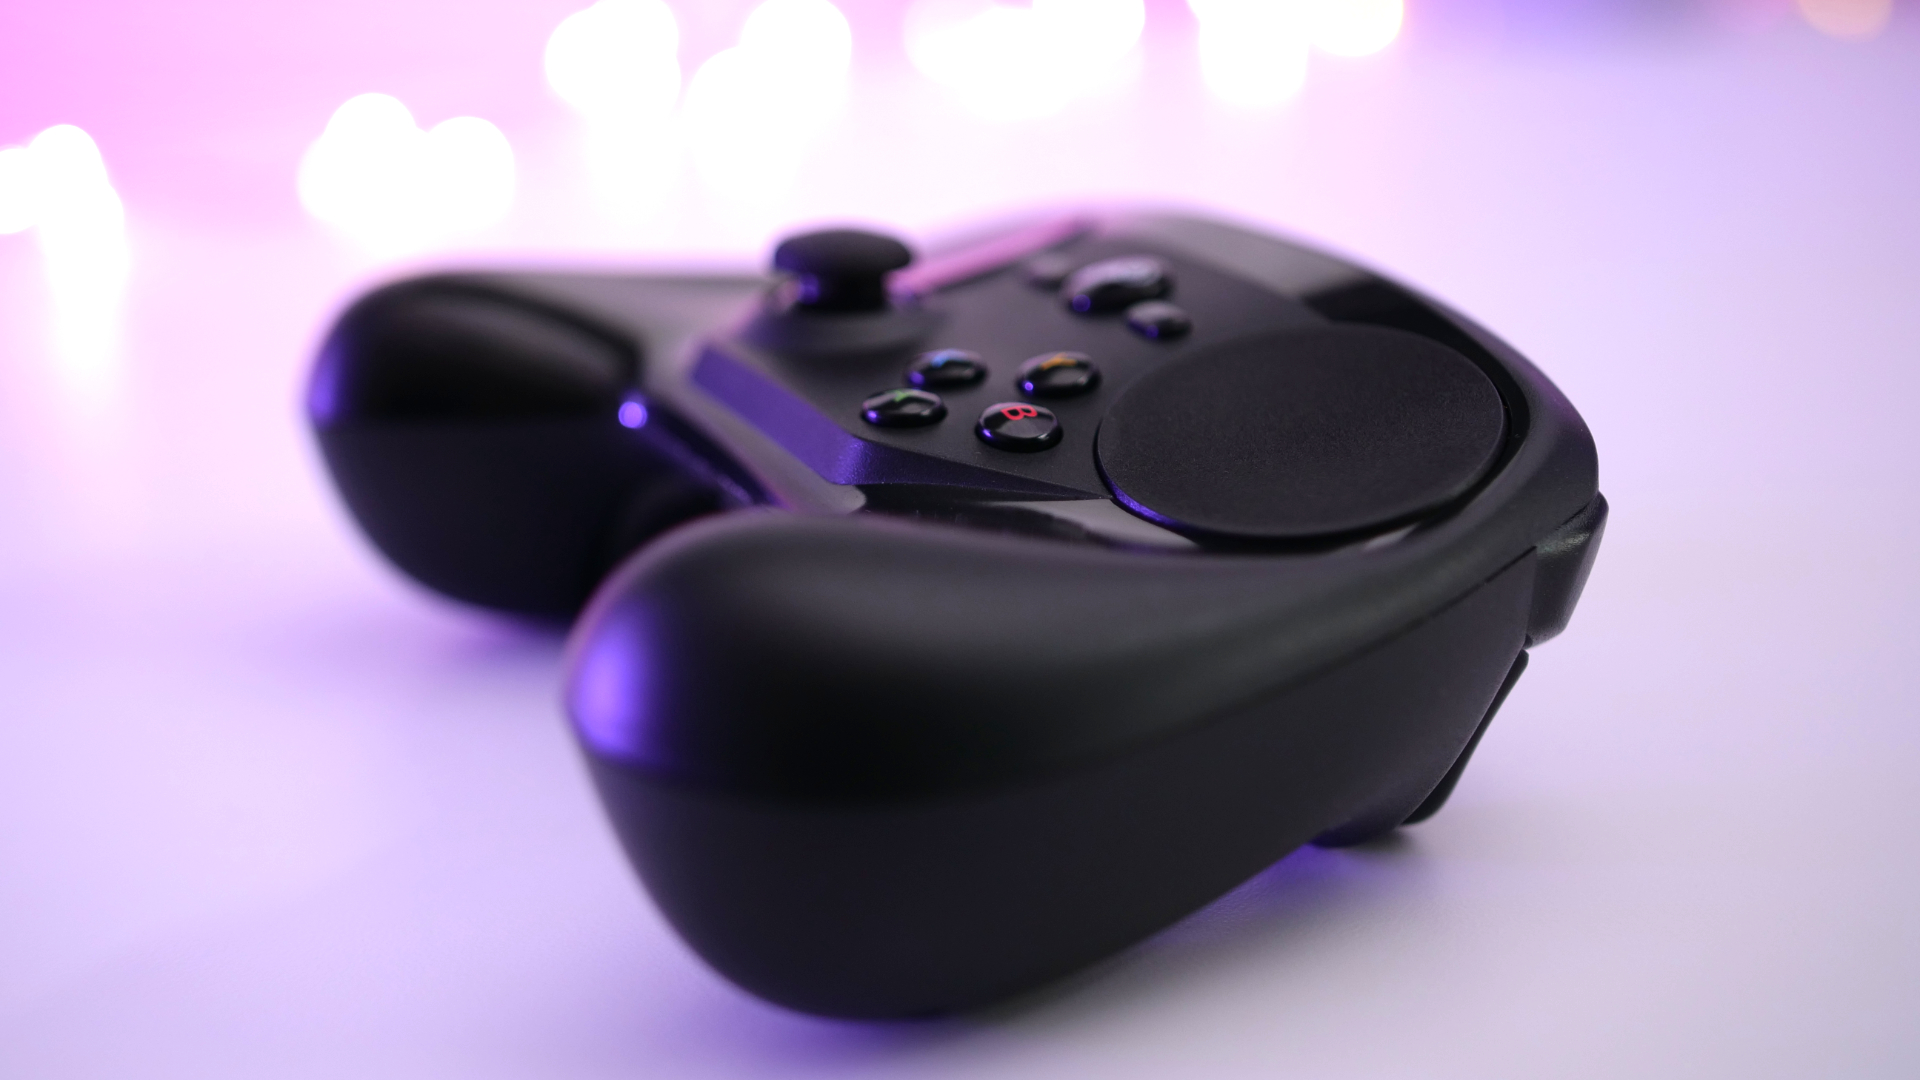 Valve S Steam Controller Gains Bluetooth Le Support Ahead Of Steam Link App Launch 9to5mac